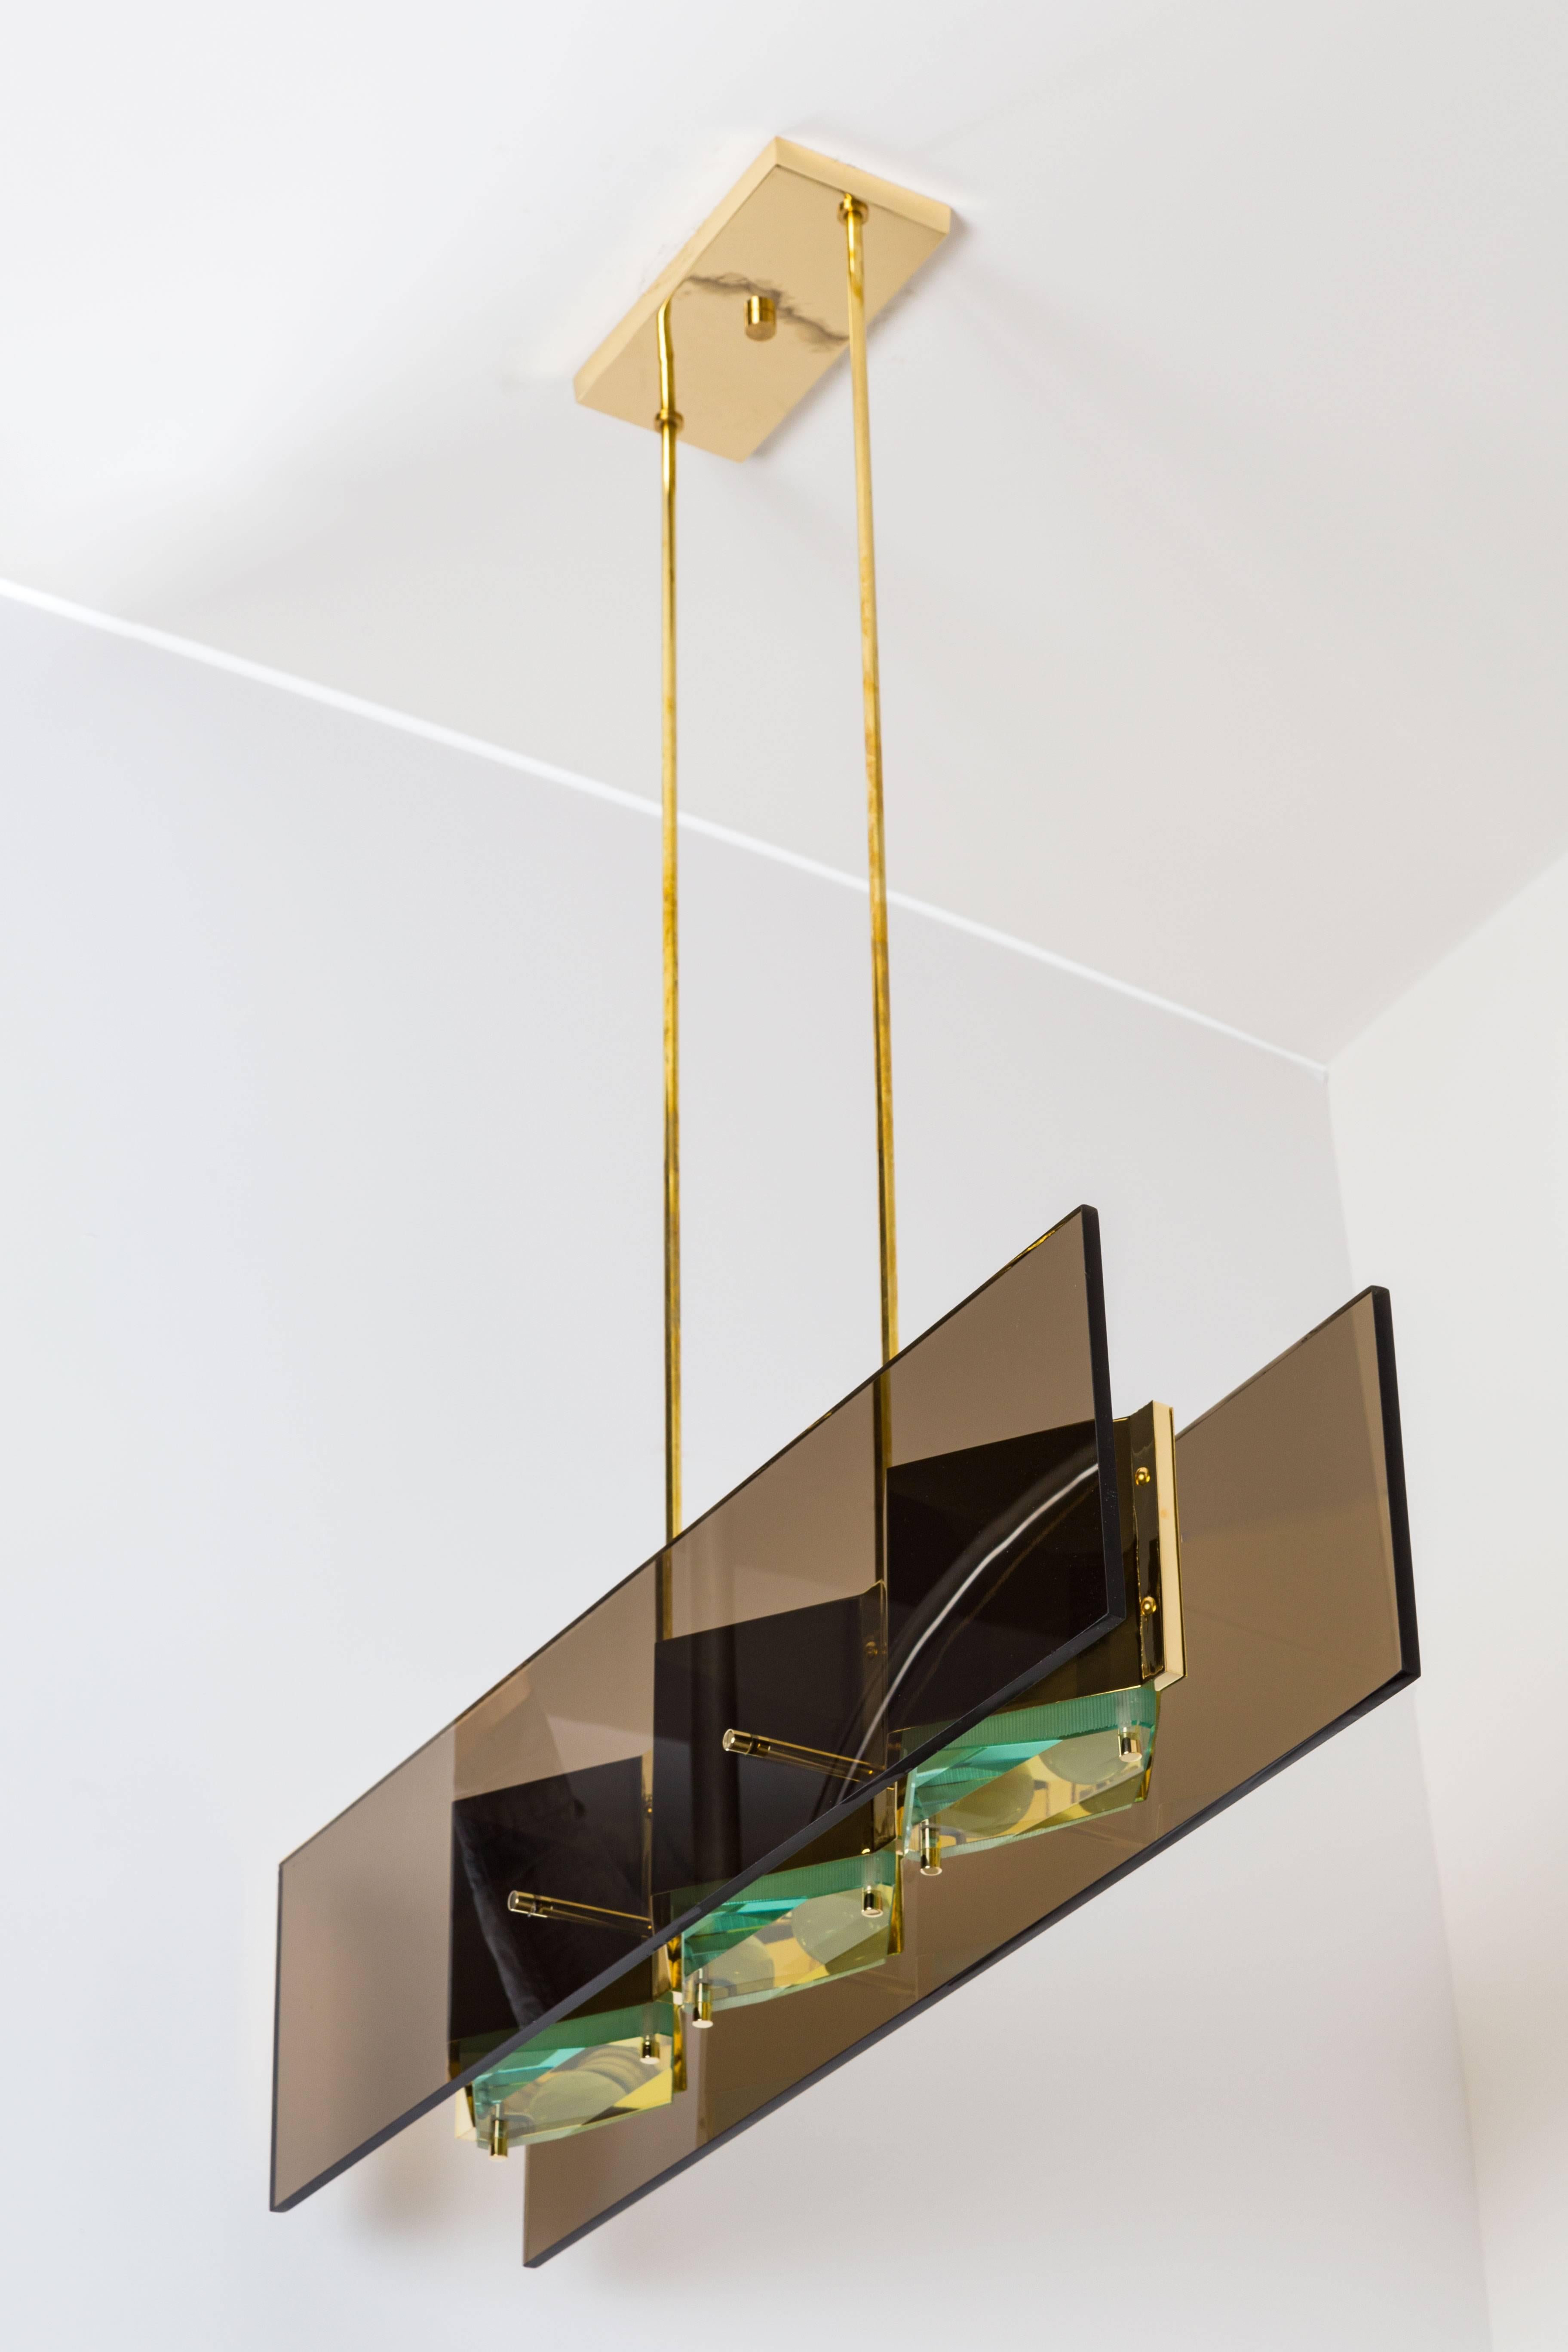 Rare 1960s Stilnovo brass chandelier with diamond cut green glass 
diffusers. Two smoked glass rectangles frame the brass shades.
Fully restored with proof of original label. Green glass diffusers and canopy are replaced.
Lampage is three E27